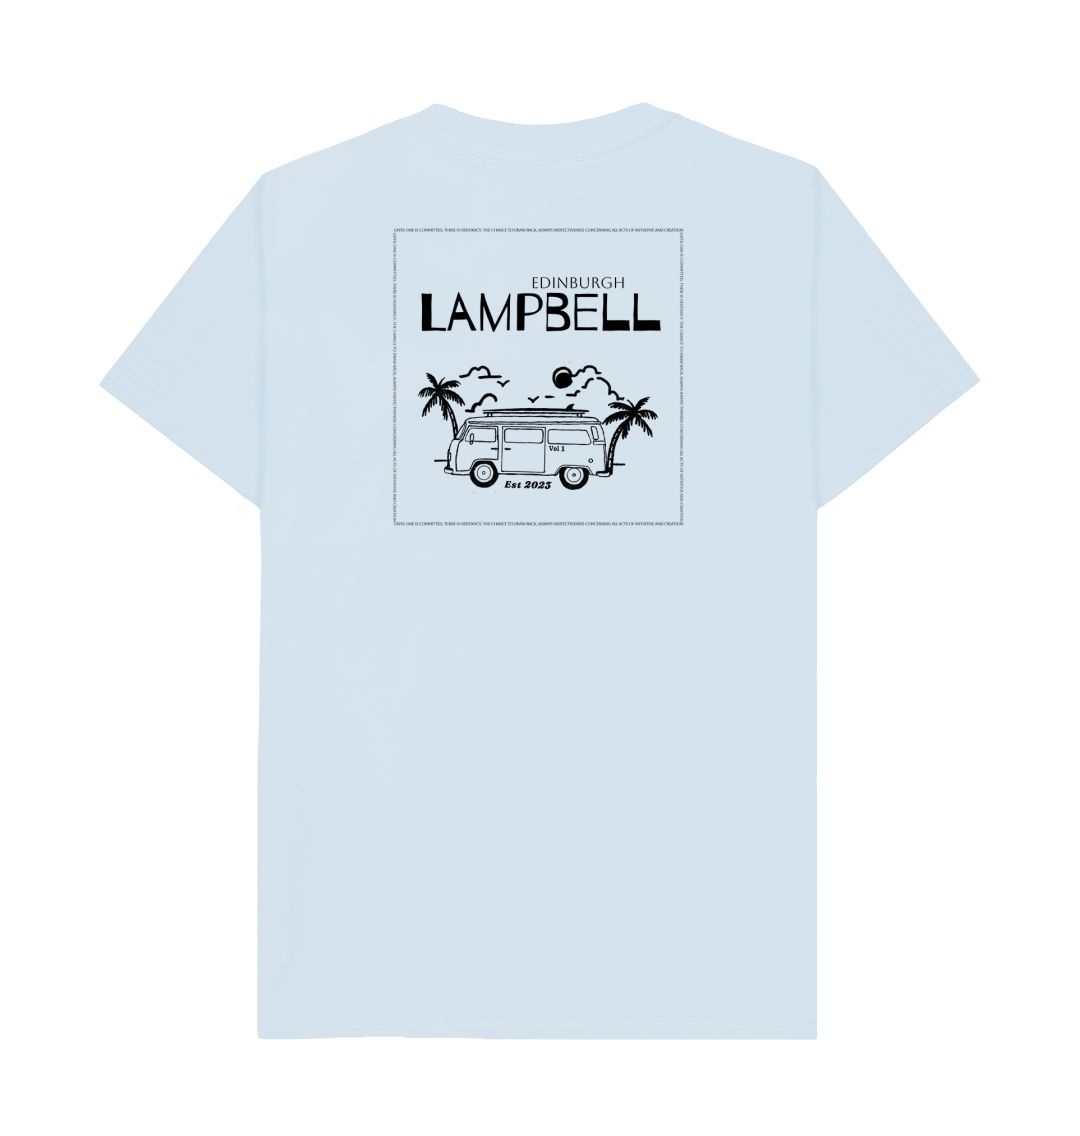 Lampbell Clothing